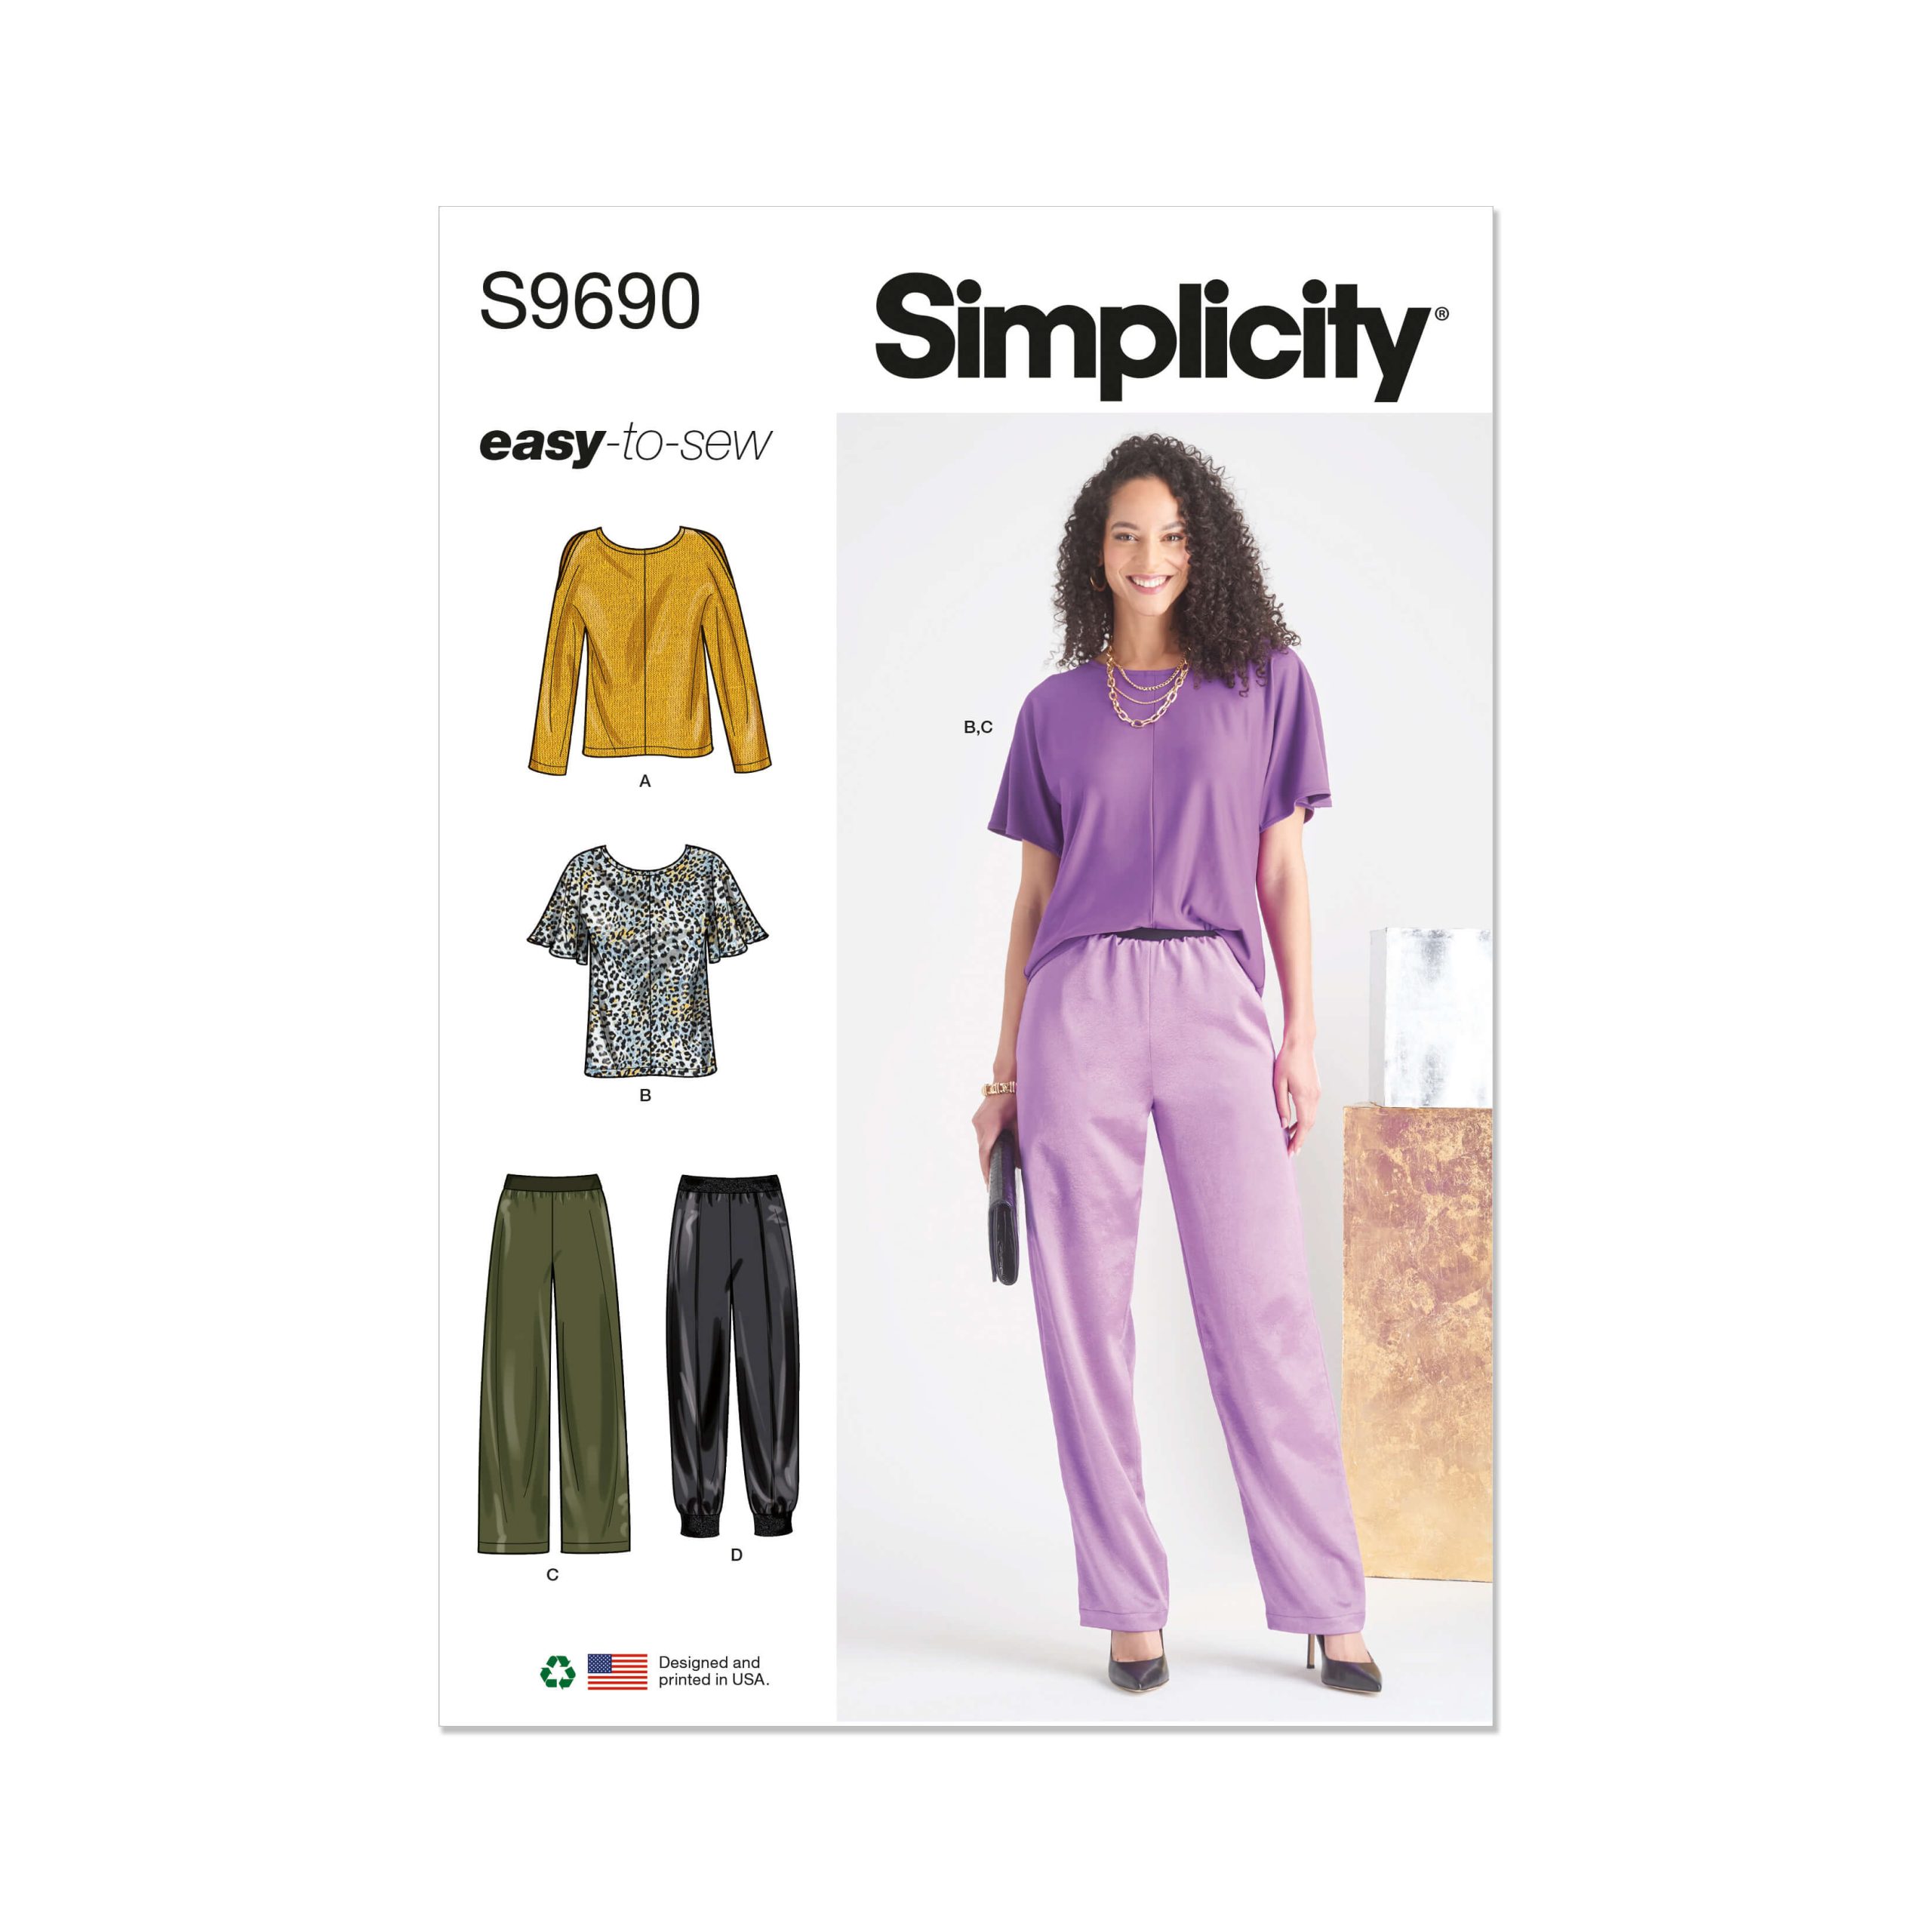 Simplicity Sewing Pattern S9690 Misses' Tops and Pull-On Trousers